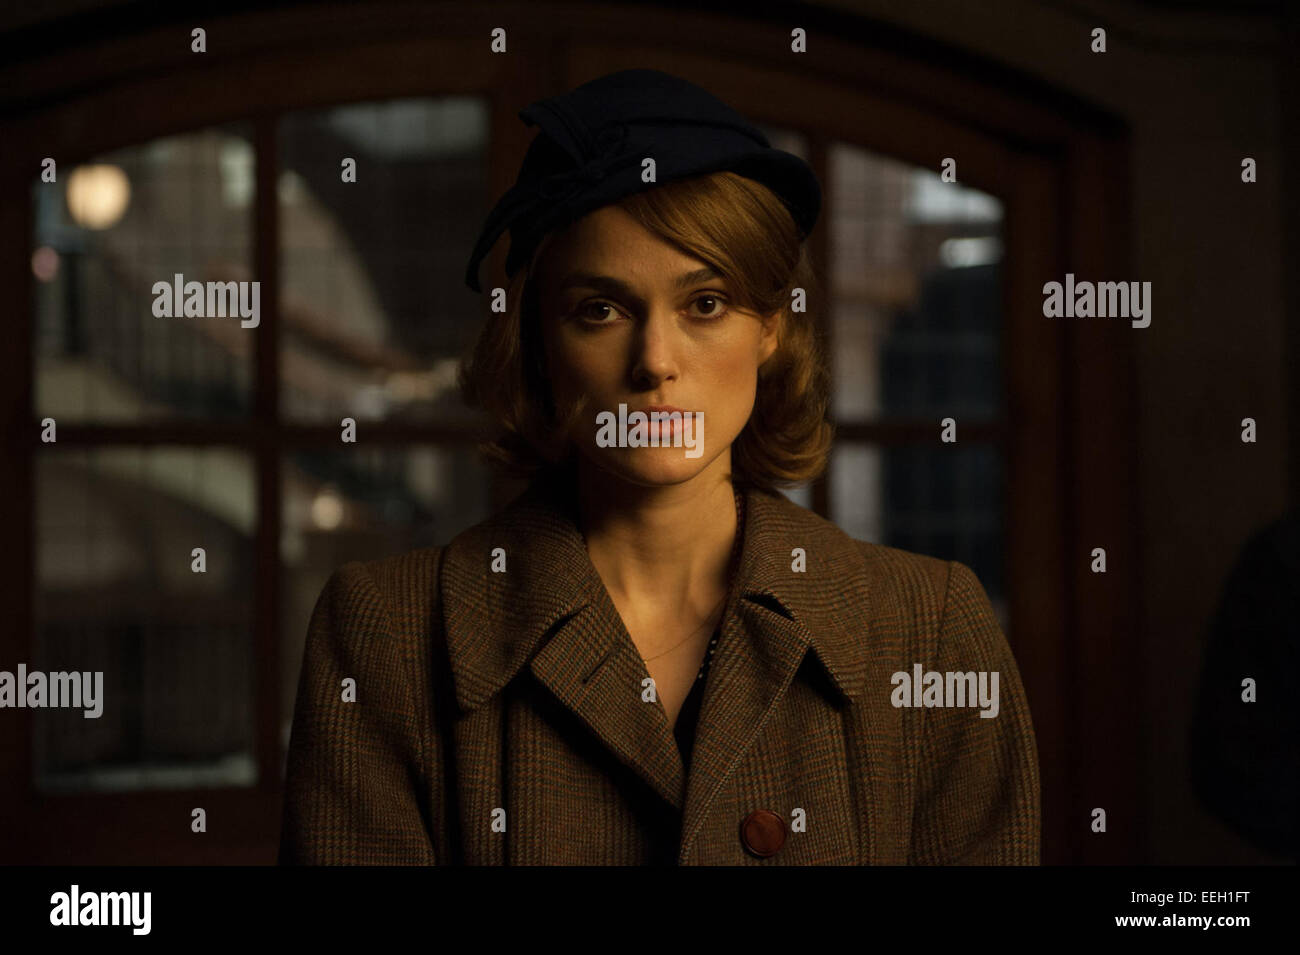 The Imitation Game is a 2014 historical thriller film about British mathematician, logician, cryptanalyst and pioneering computer scientist Alan Turing. Turing was a key figure in cracking Nazi Germany's naval Enigma code which helped the Allies win the Second World War, only to later be criminally prosecuted for his homosexuality. The film stars Benedict Cumberbatch as Turing, and is directed by Morten Tyldum. Stock Photo